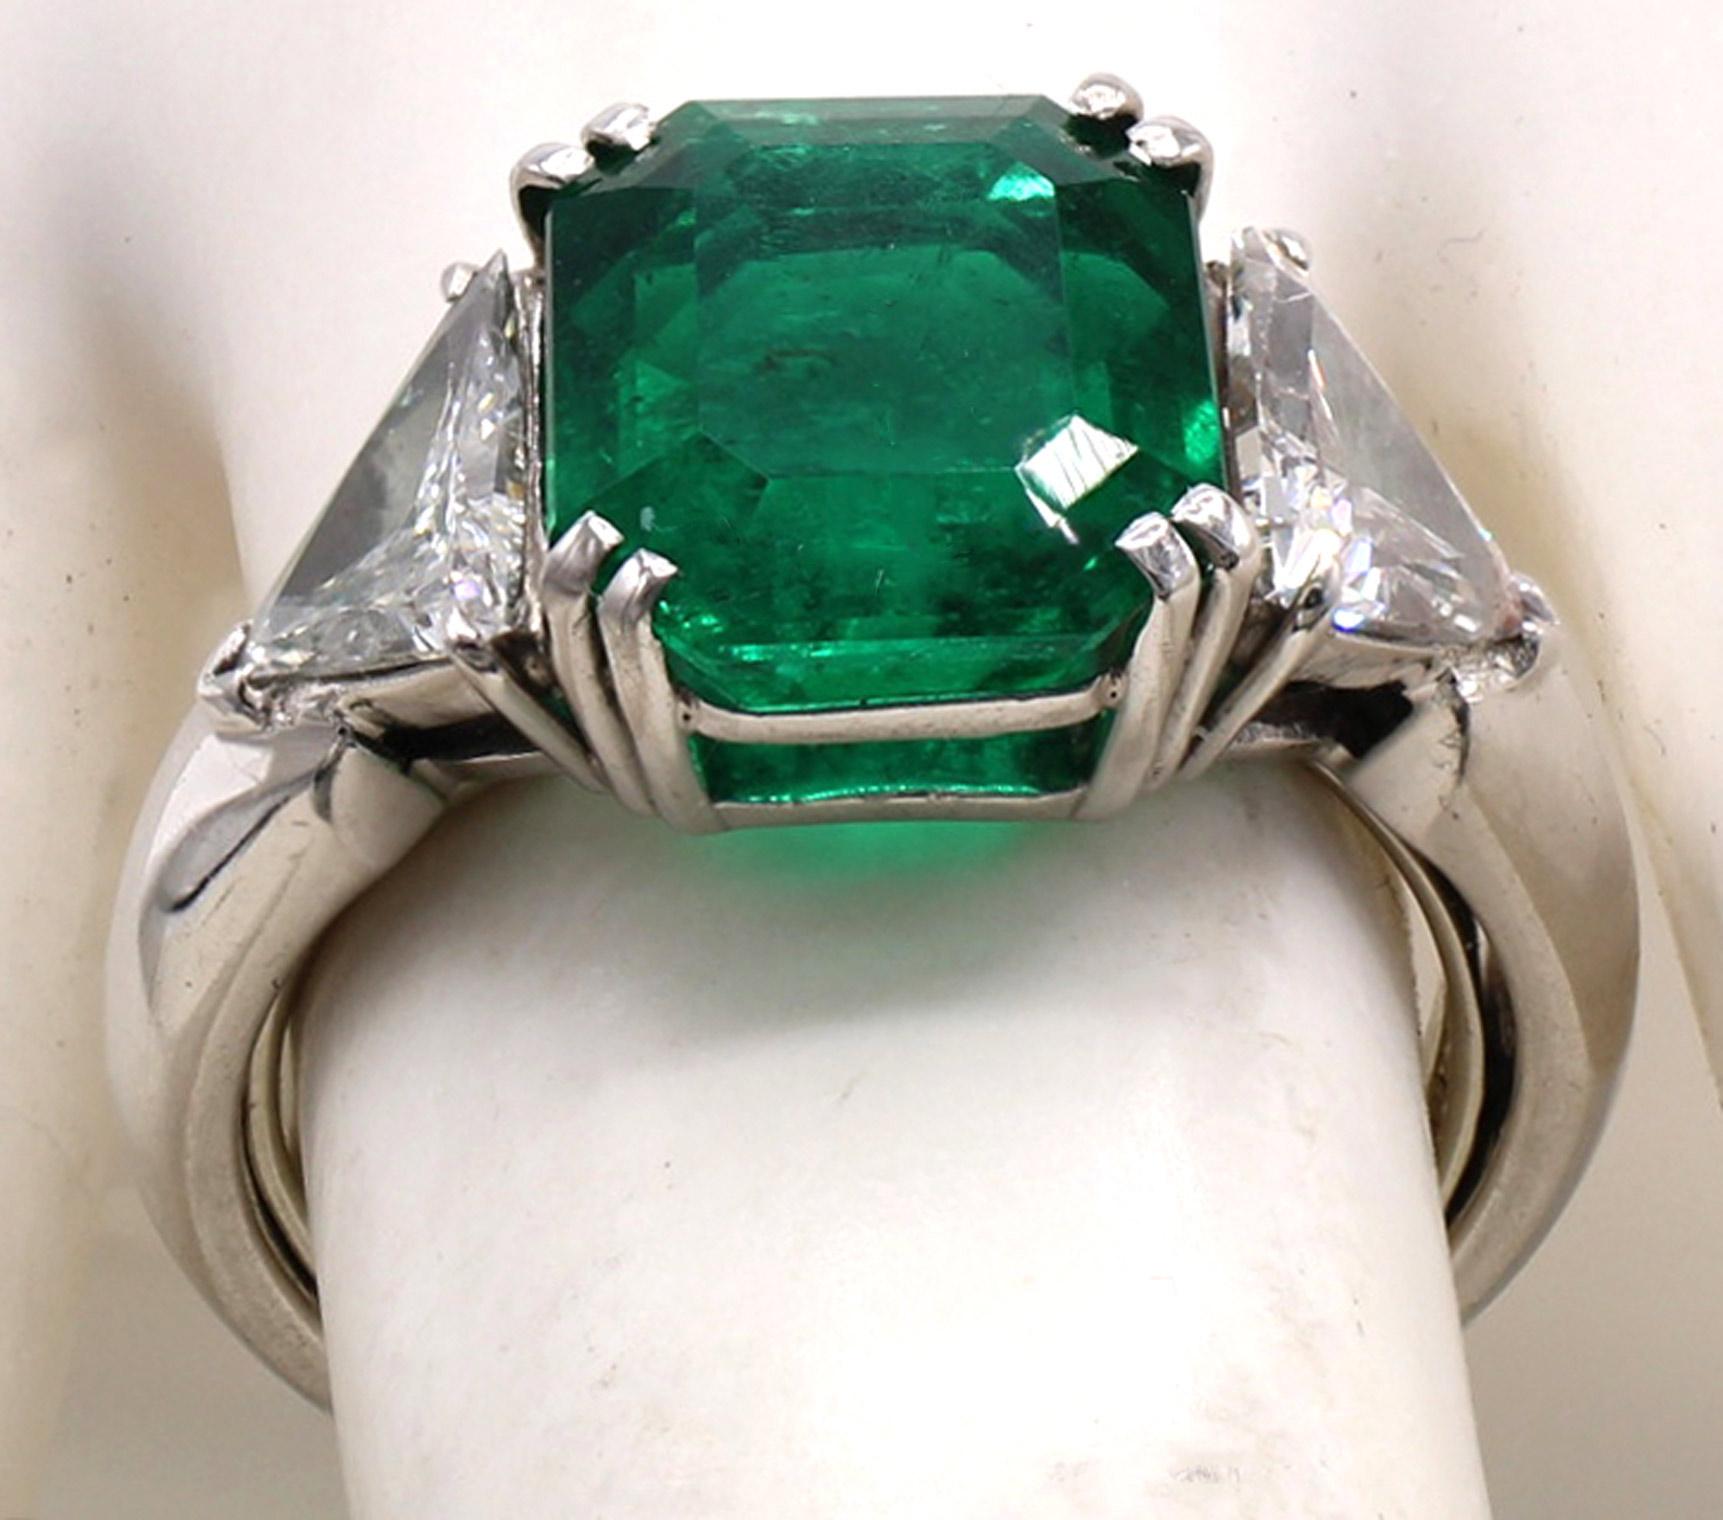 Gorgeous Colombian Emerald diamond platinum ring by renown jeweler Andrew Clunn. The perfectly cut square step cut emerald faces up larger than it's actual weight of 4.48 carats and this gemstone exhibits a luscious deep forest green with a